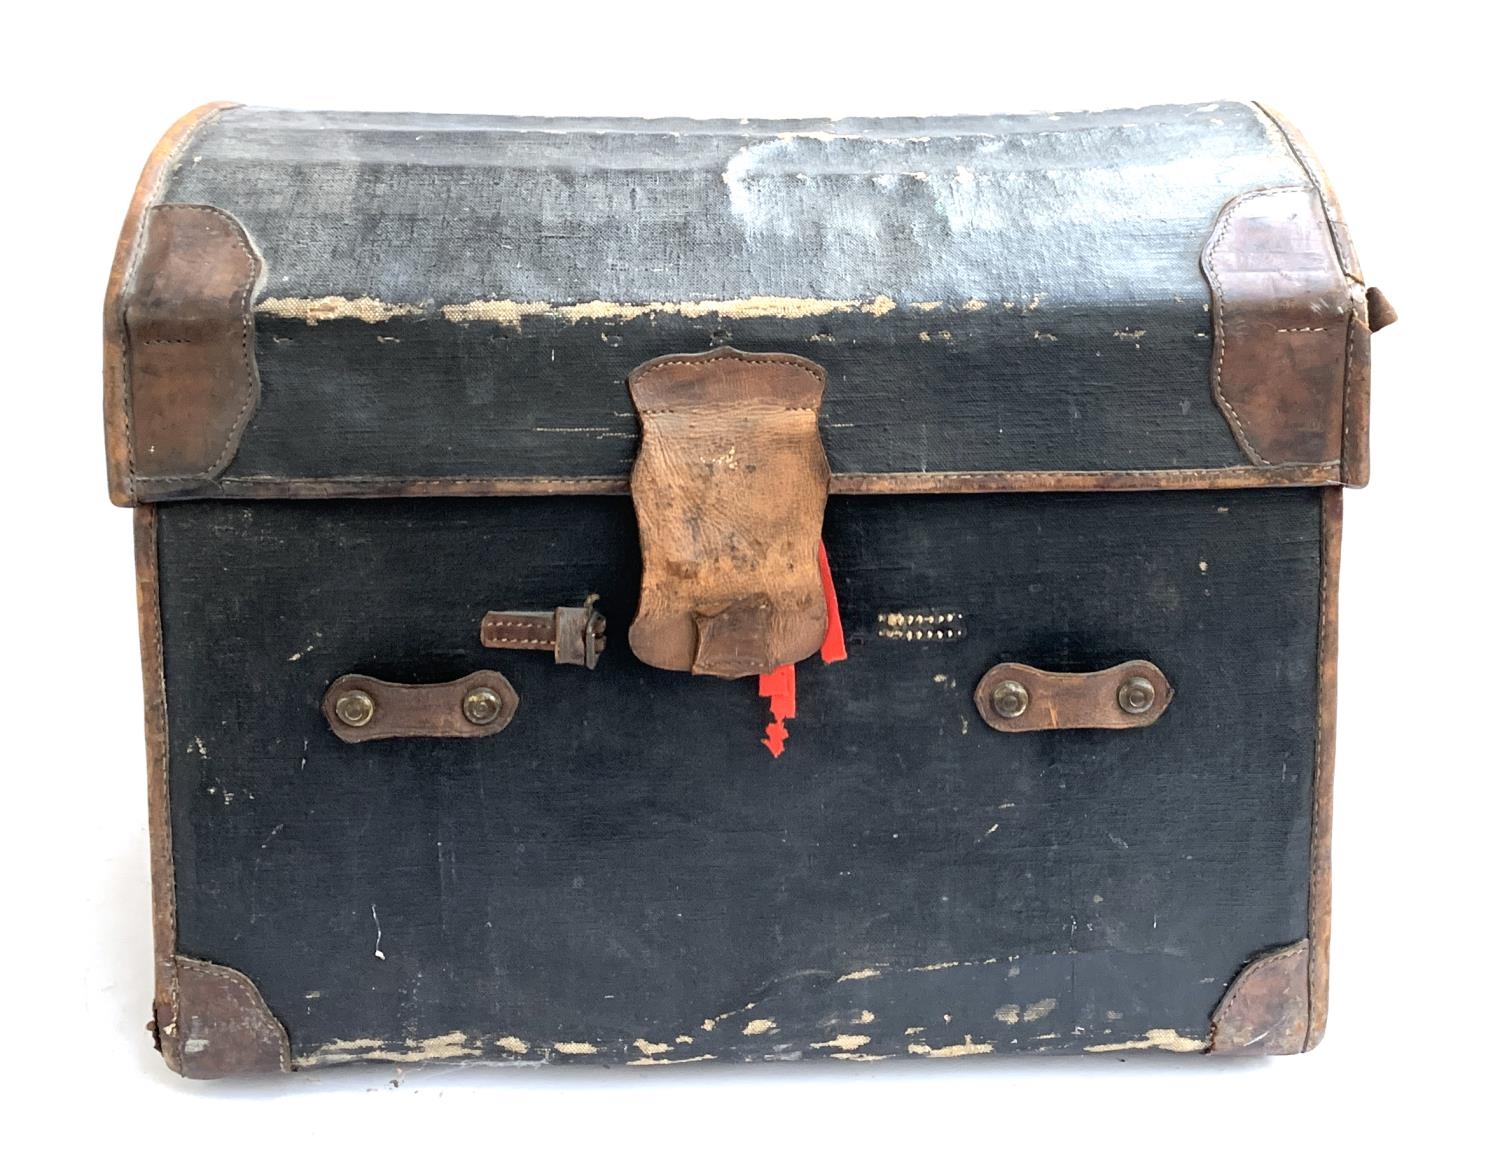 A Victorian canvas domed travel trunk, made at the Army & Navy co-operative limited, with